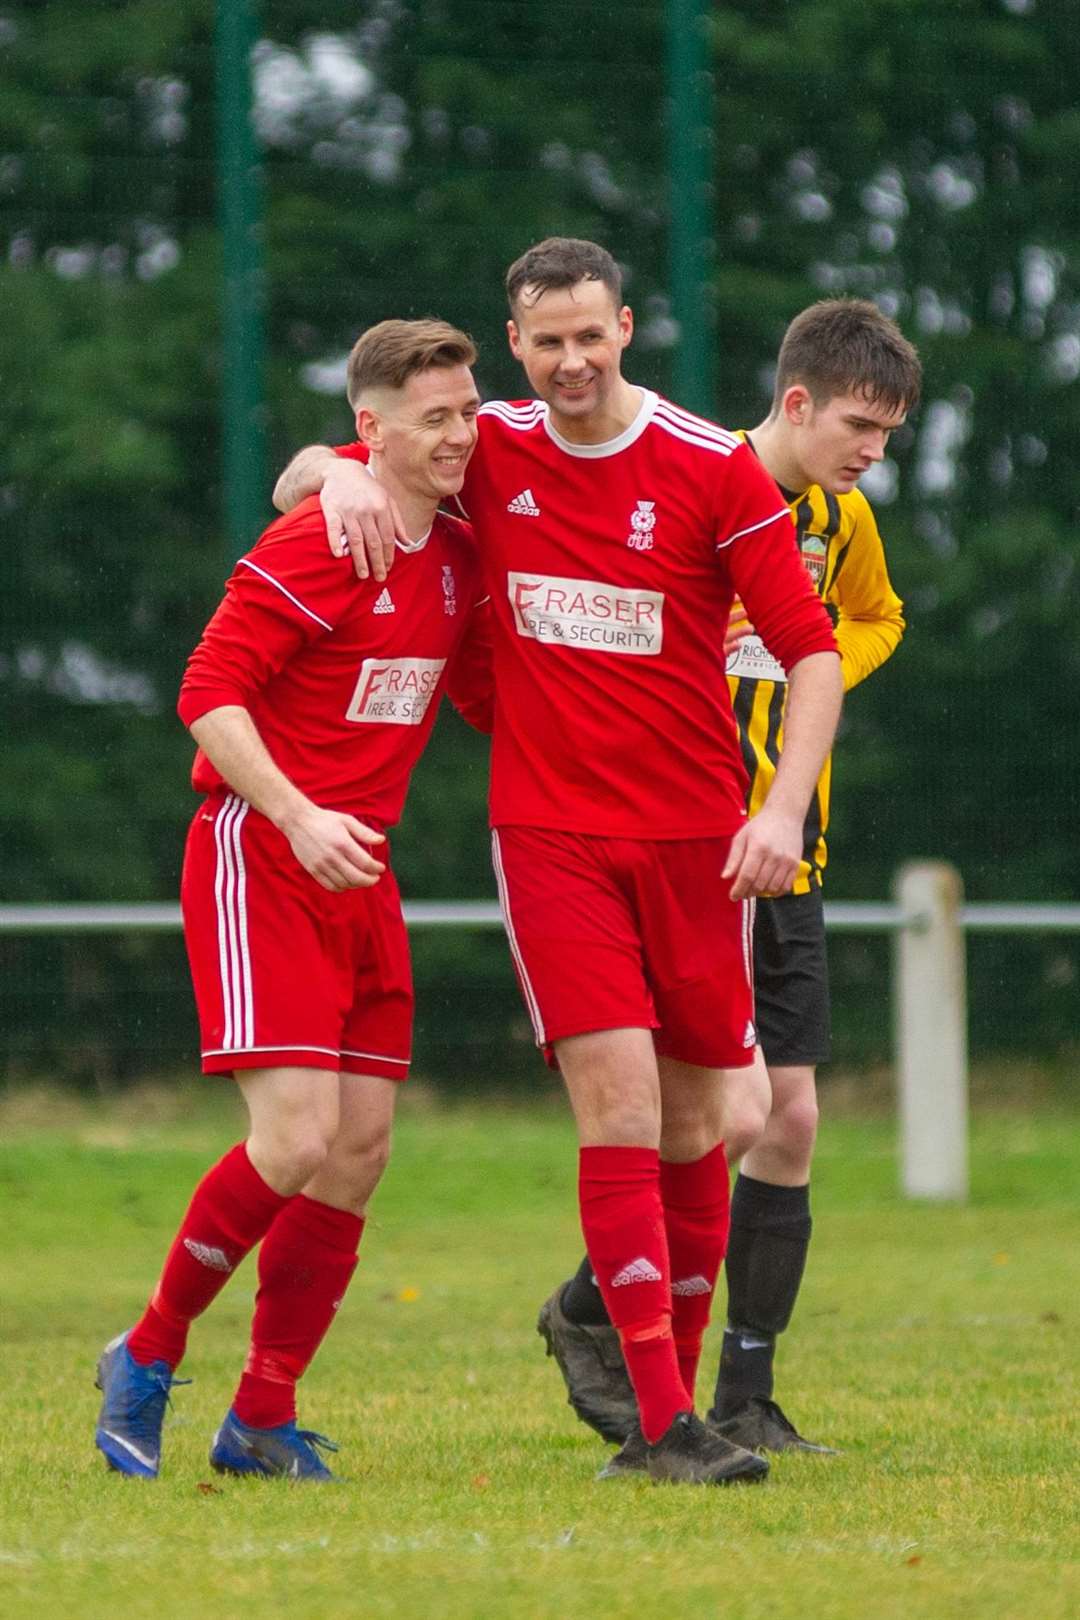 Forres Thistle's Neil Moir celebrates opening the scoring for the home side. ..Forres Thistle (6) vs Islavale (1) - North Region Juniors - Logie Park, Forres. ..Picture: Daniel Forsyth..